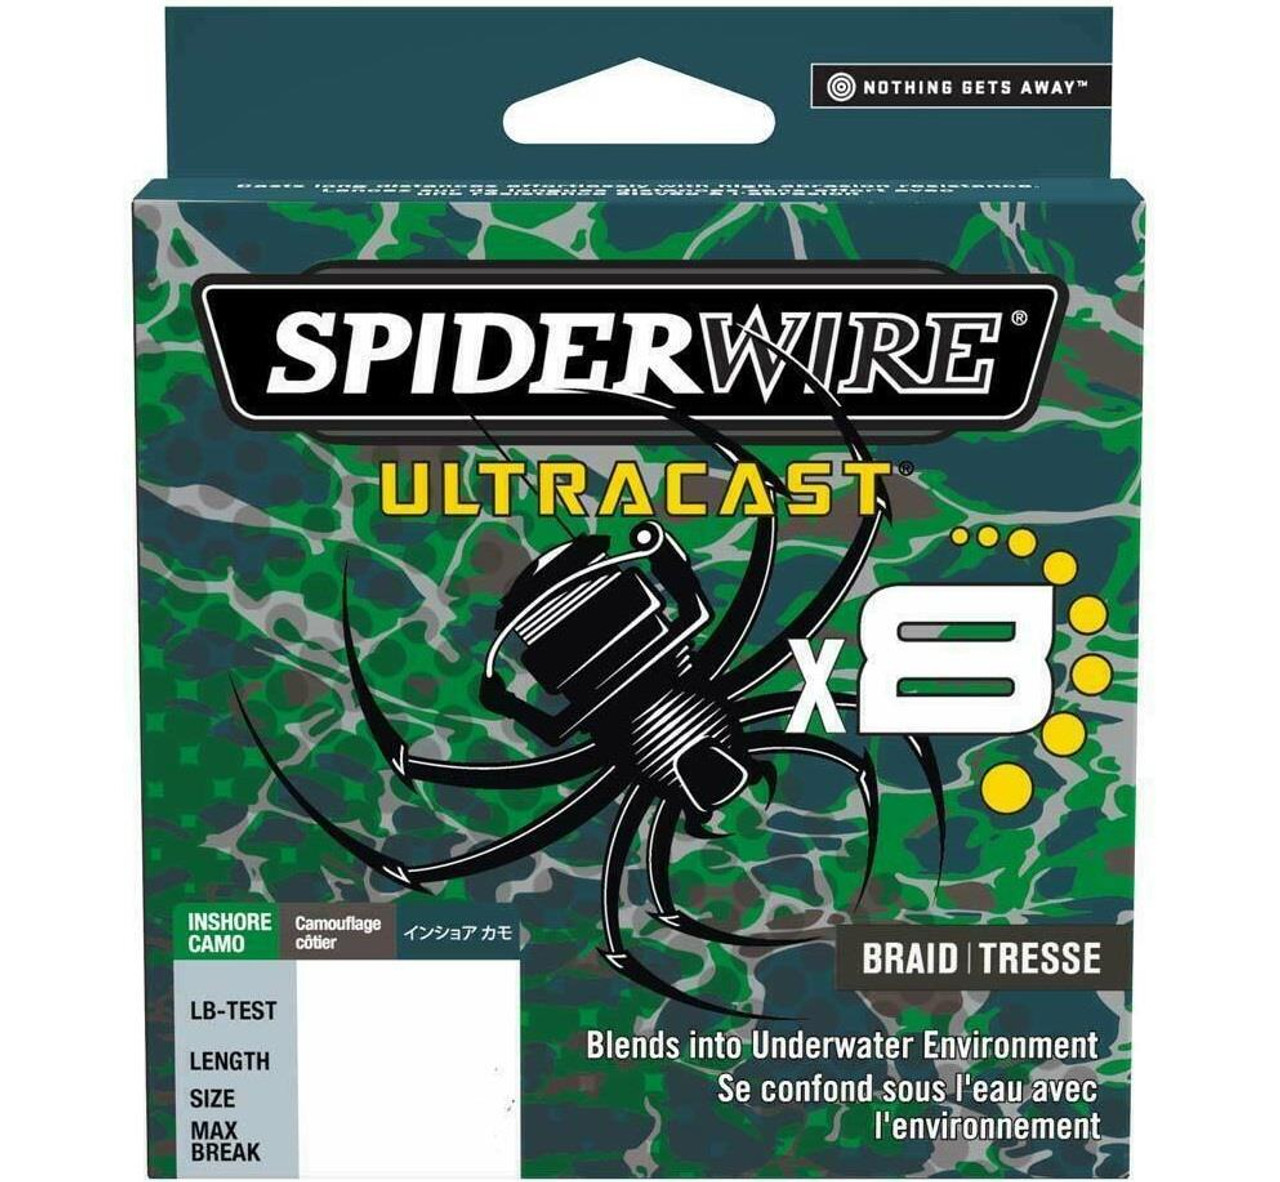 Spiderwire Ultracast Braid Line - Yeager's Sporting Goods